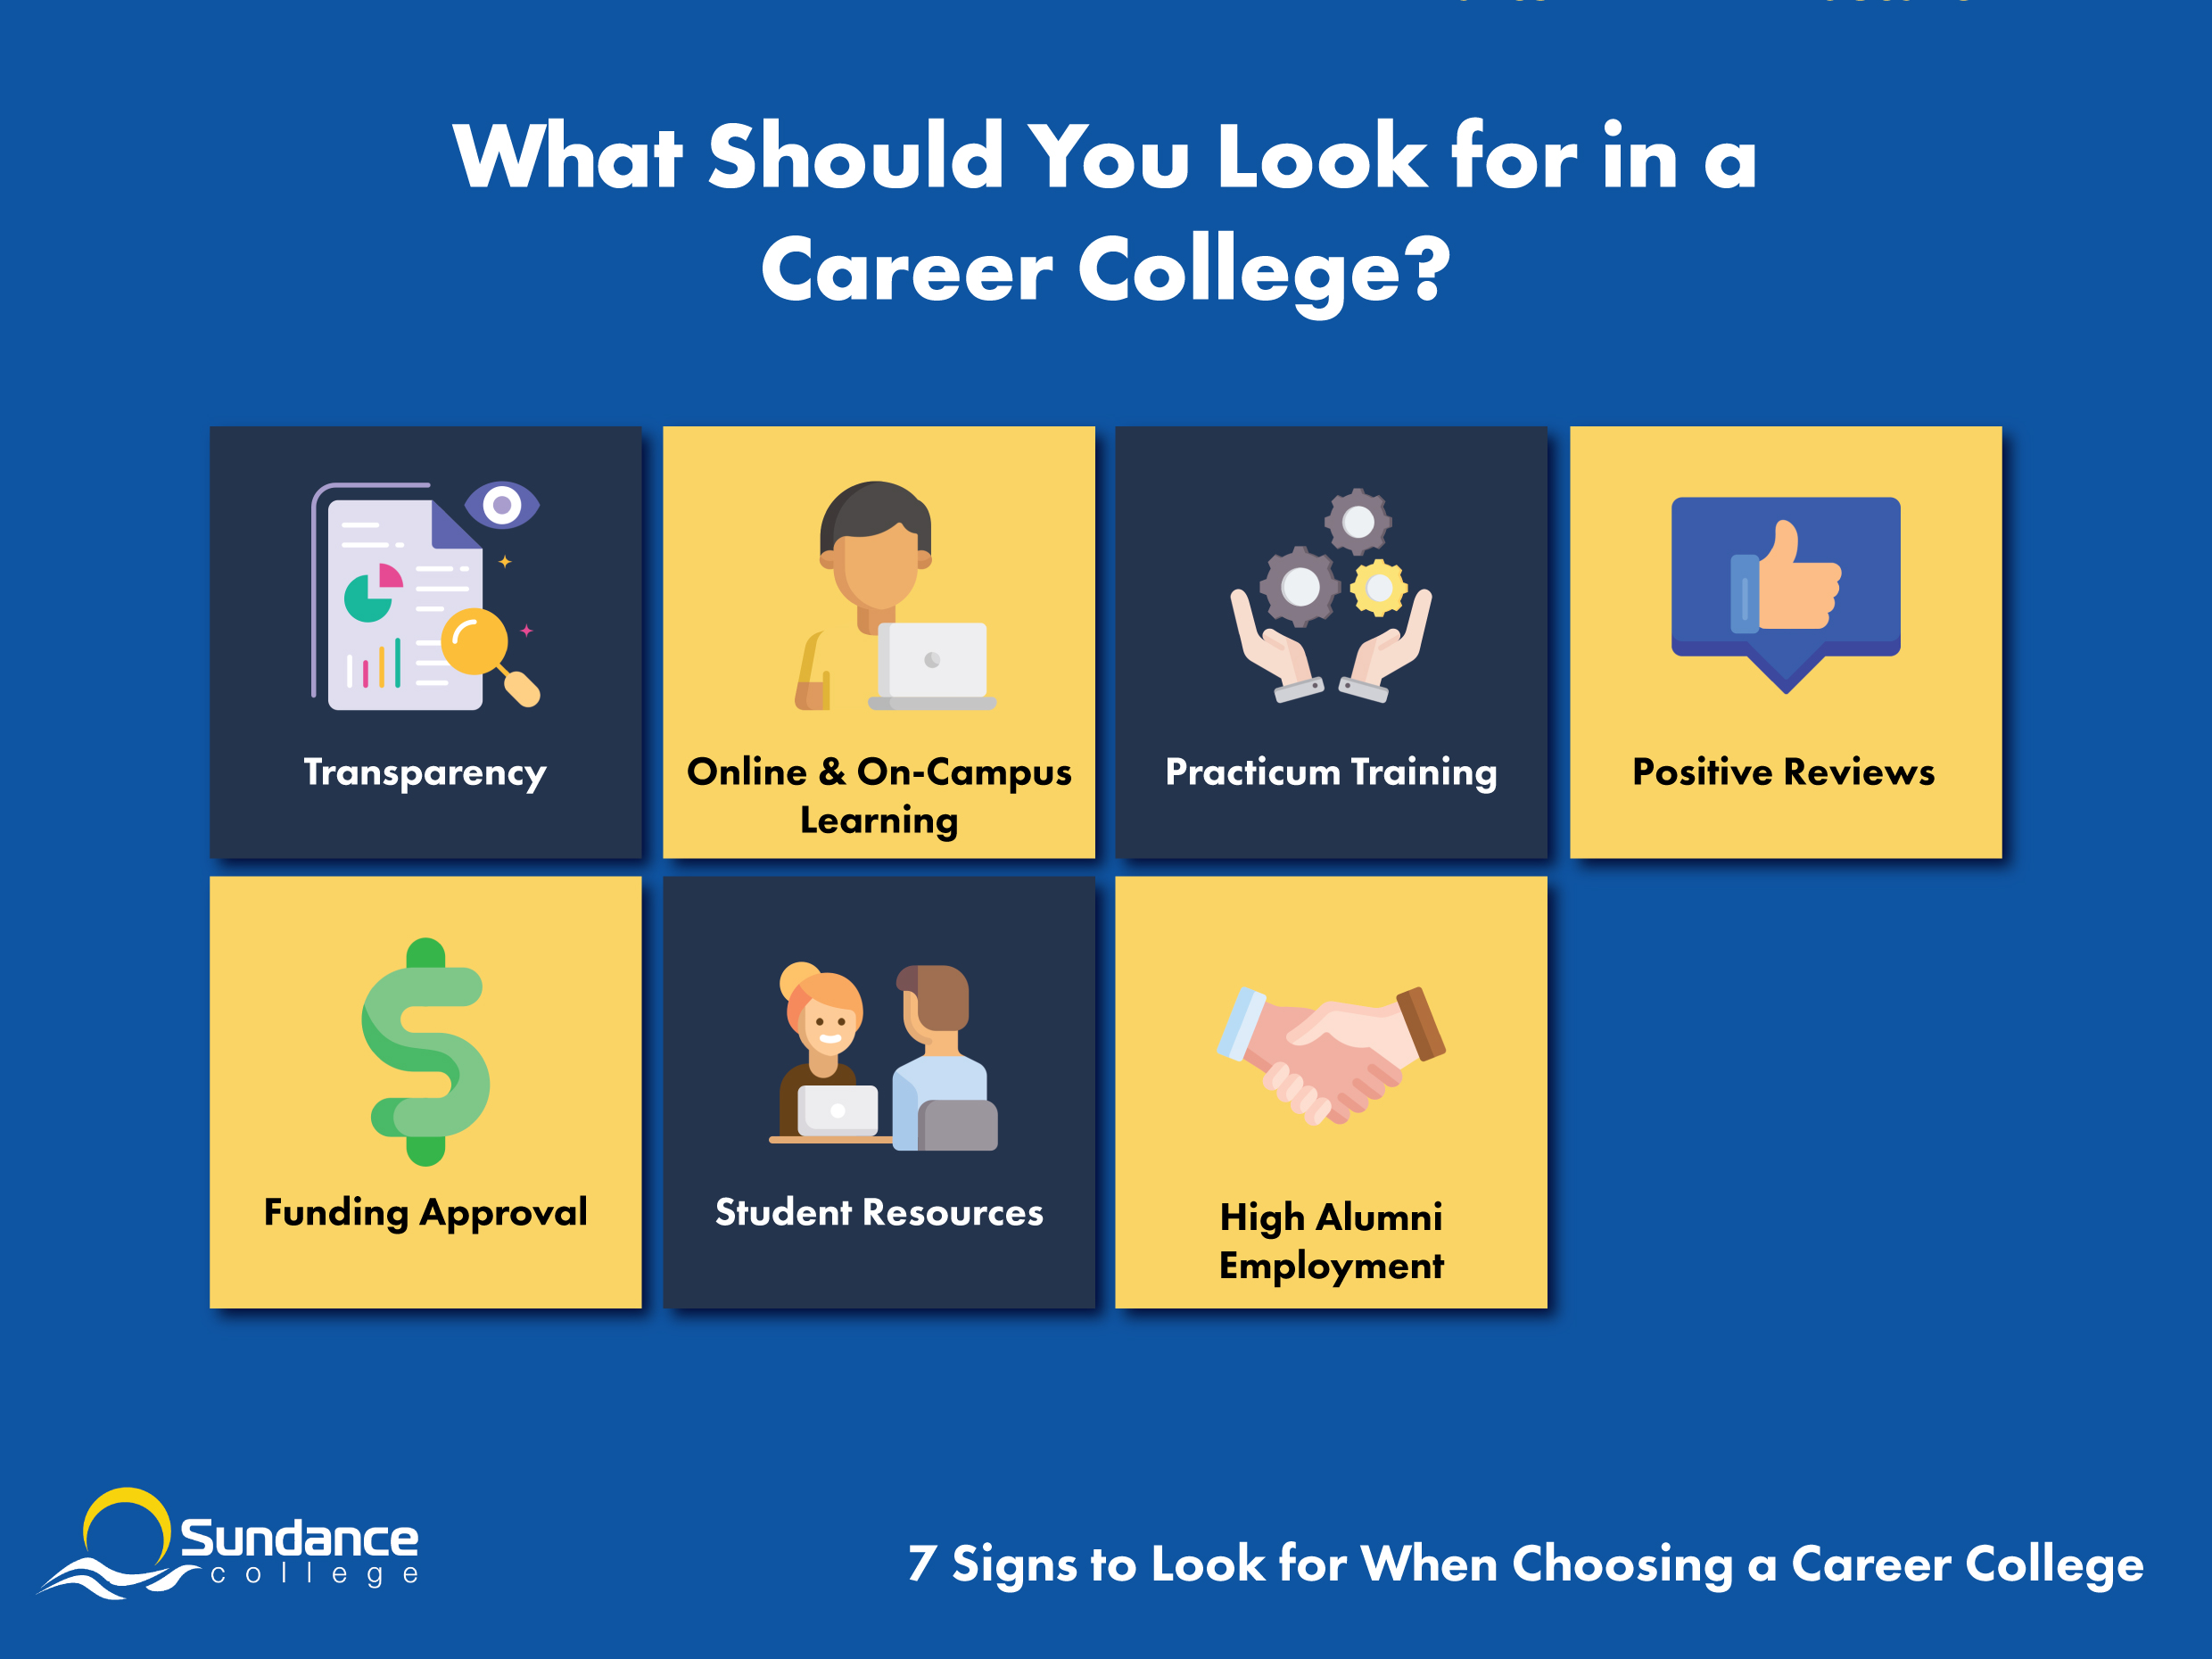 Infographic illustrating what to look for in a career college: transparency, funding approval, online and on-campus learning, student resources, practicum training, high alumni employment, positive reviews.